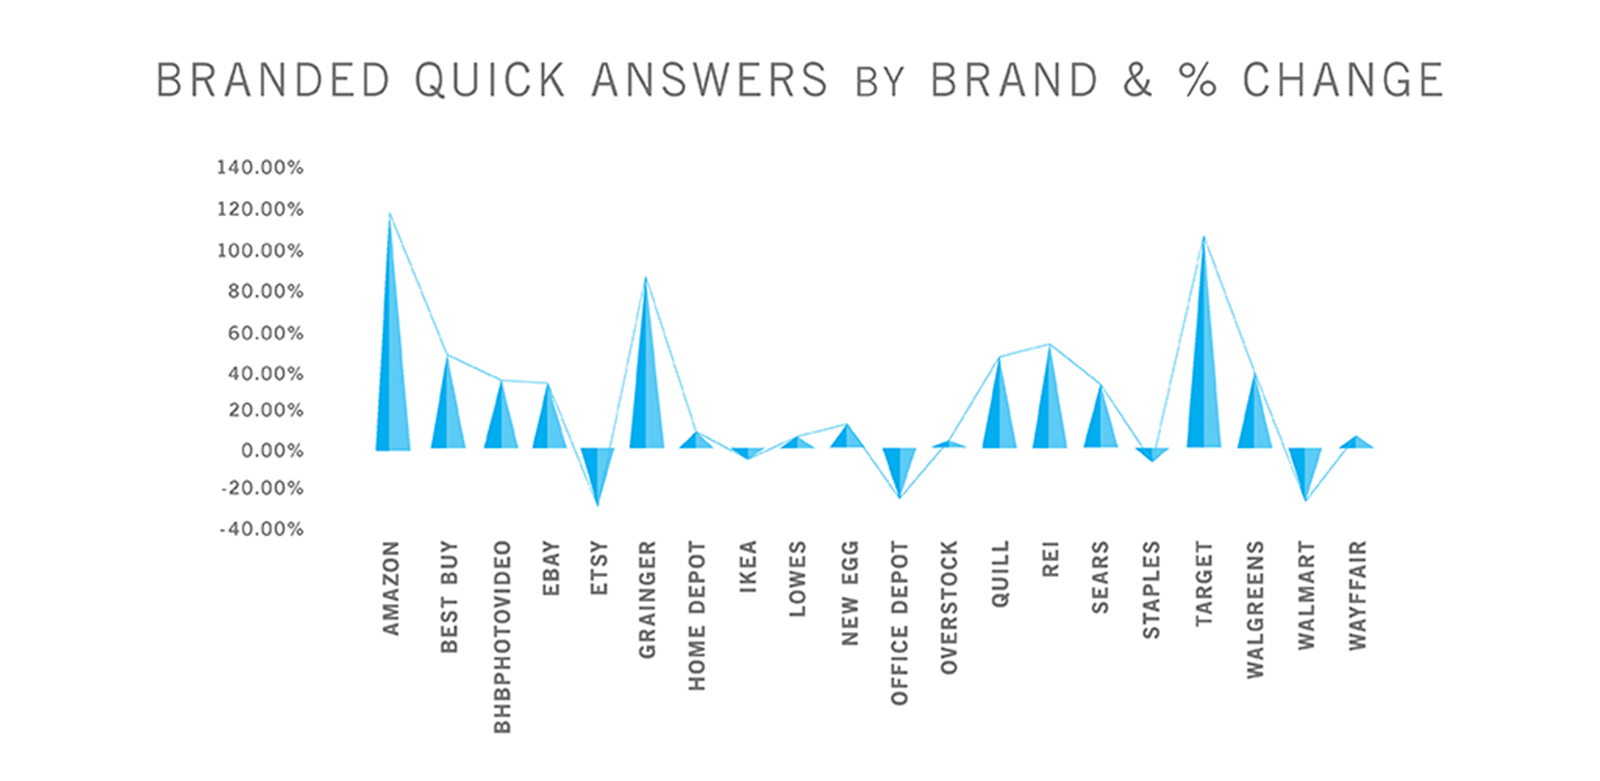 Branded quick answers by brand and percentage change